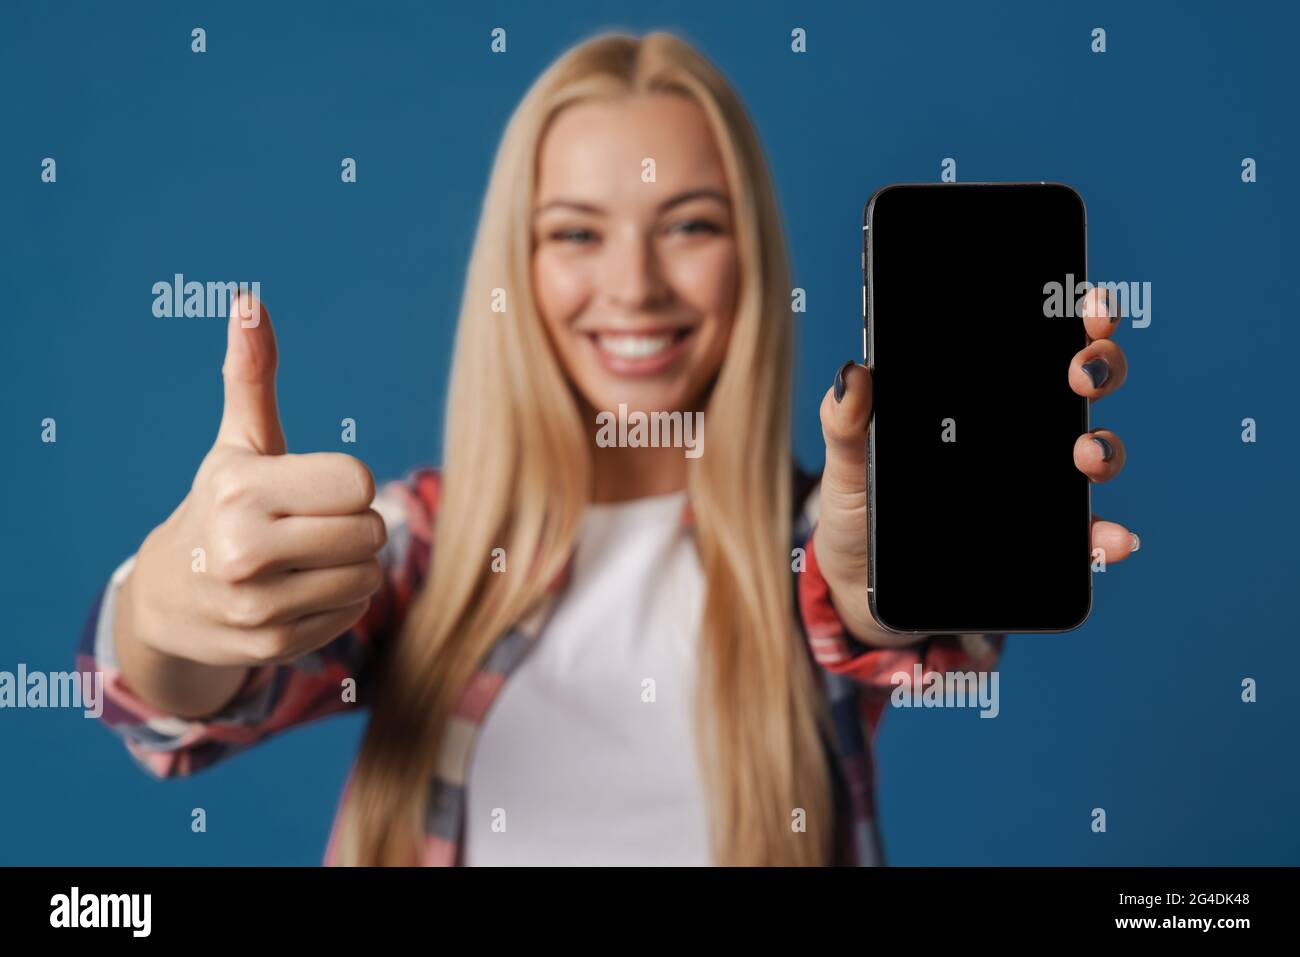 Blonde happy woman showing thumb up while showing mobile phone isolated over blue background Stock Photo